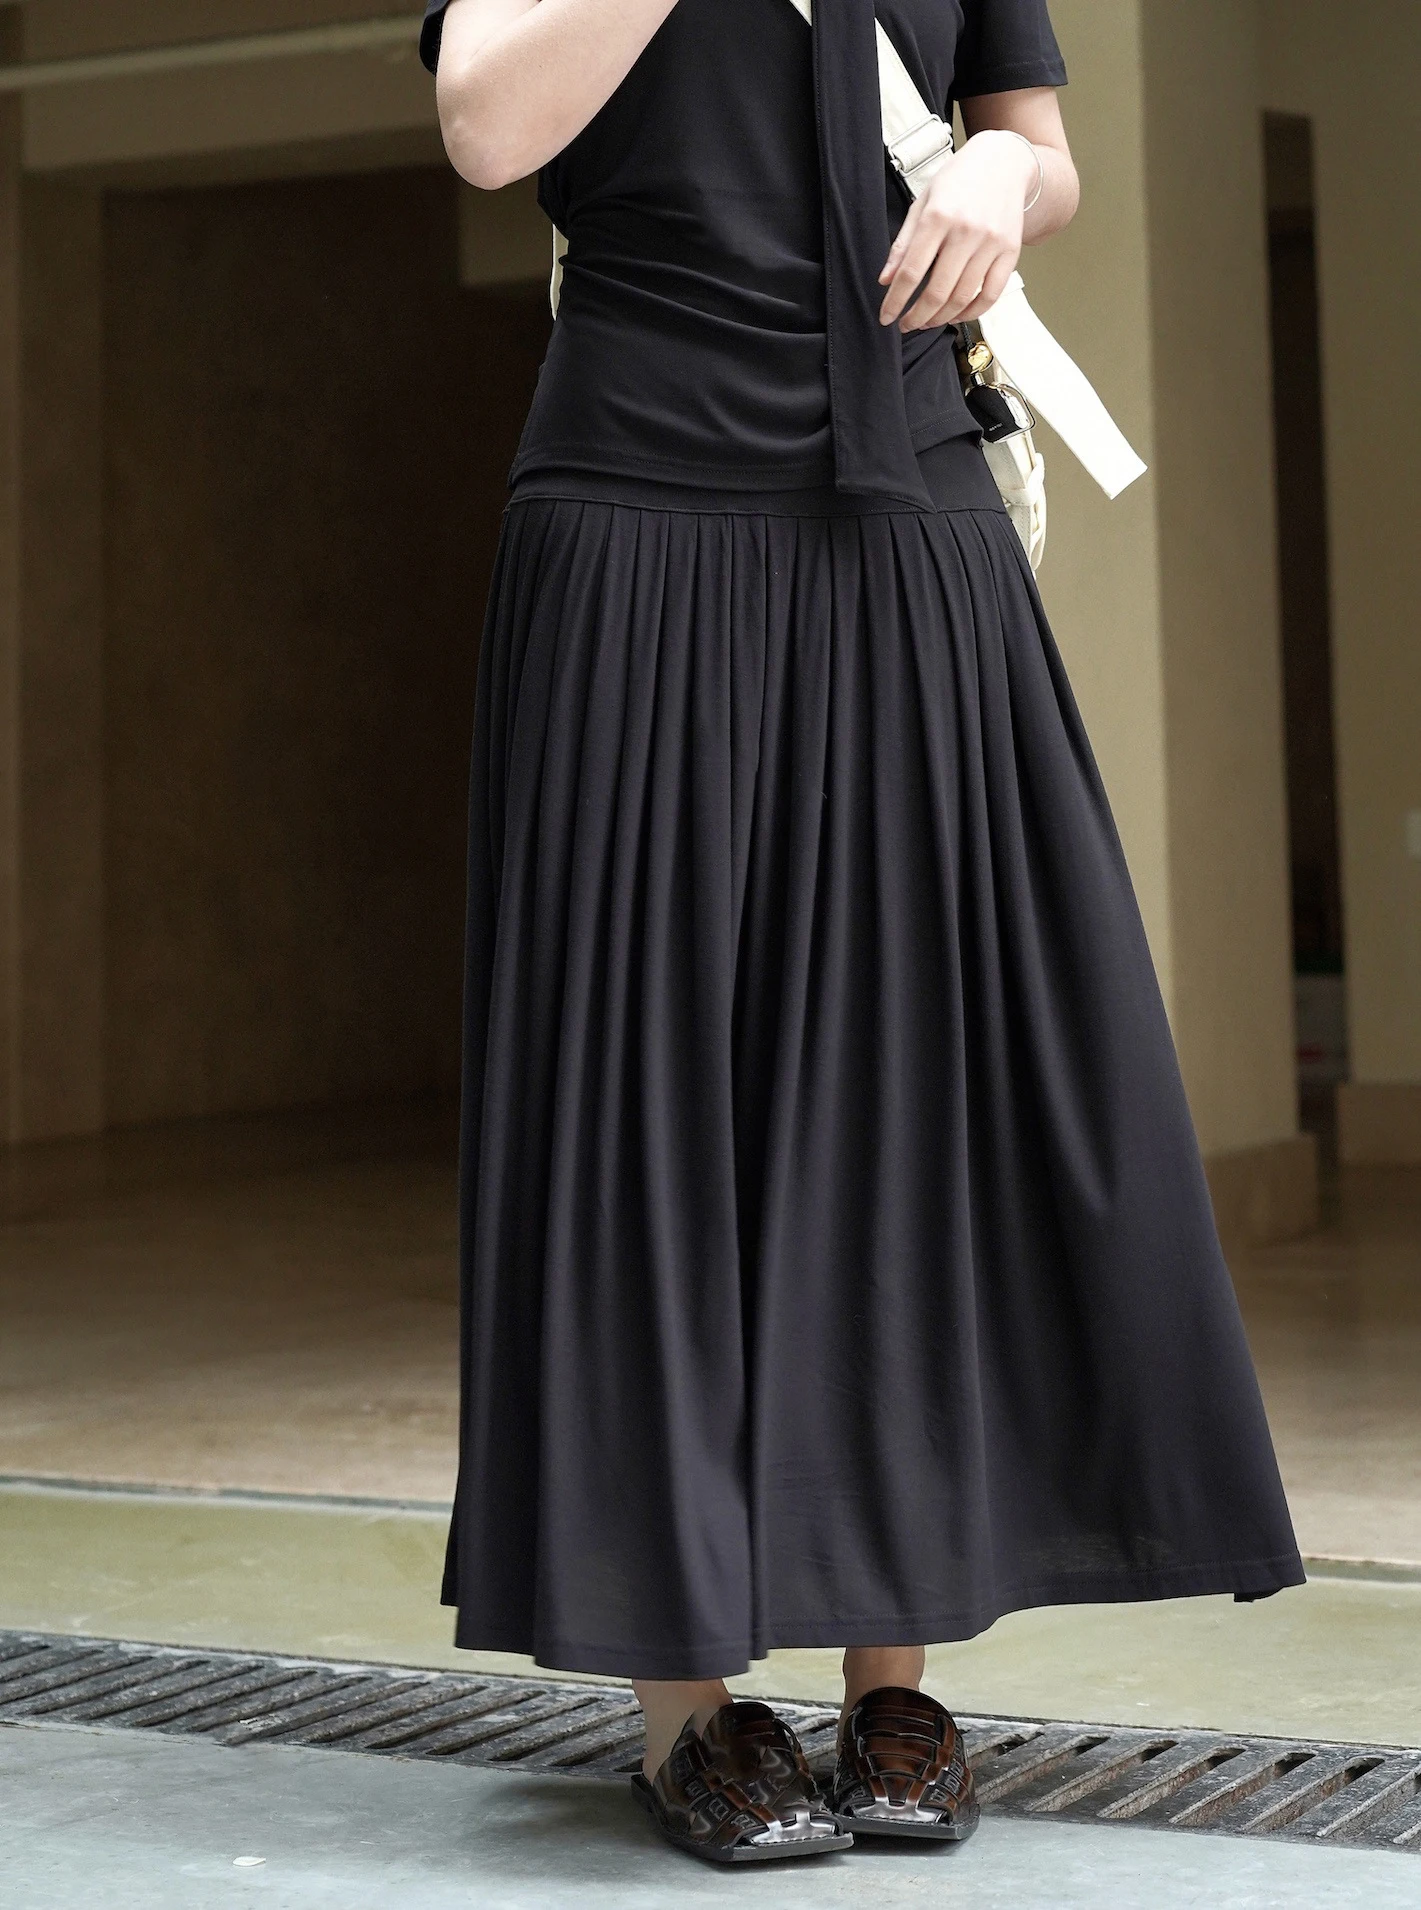 Discover more than 232 ladies black skirts latest